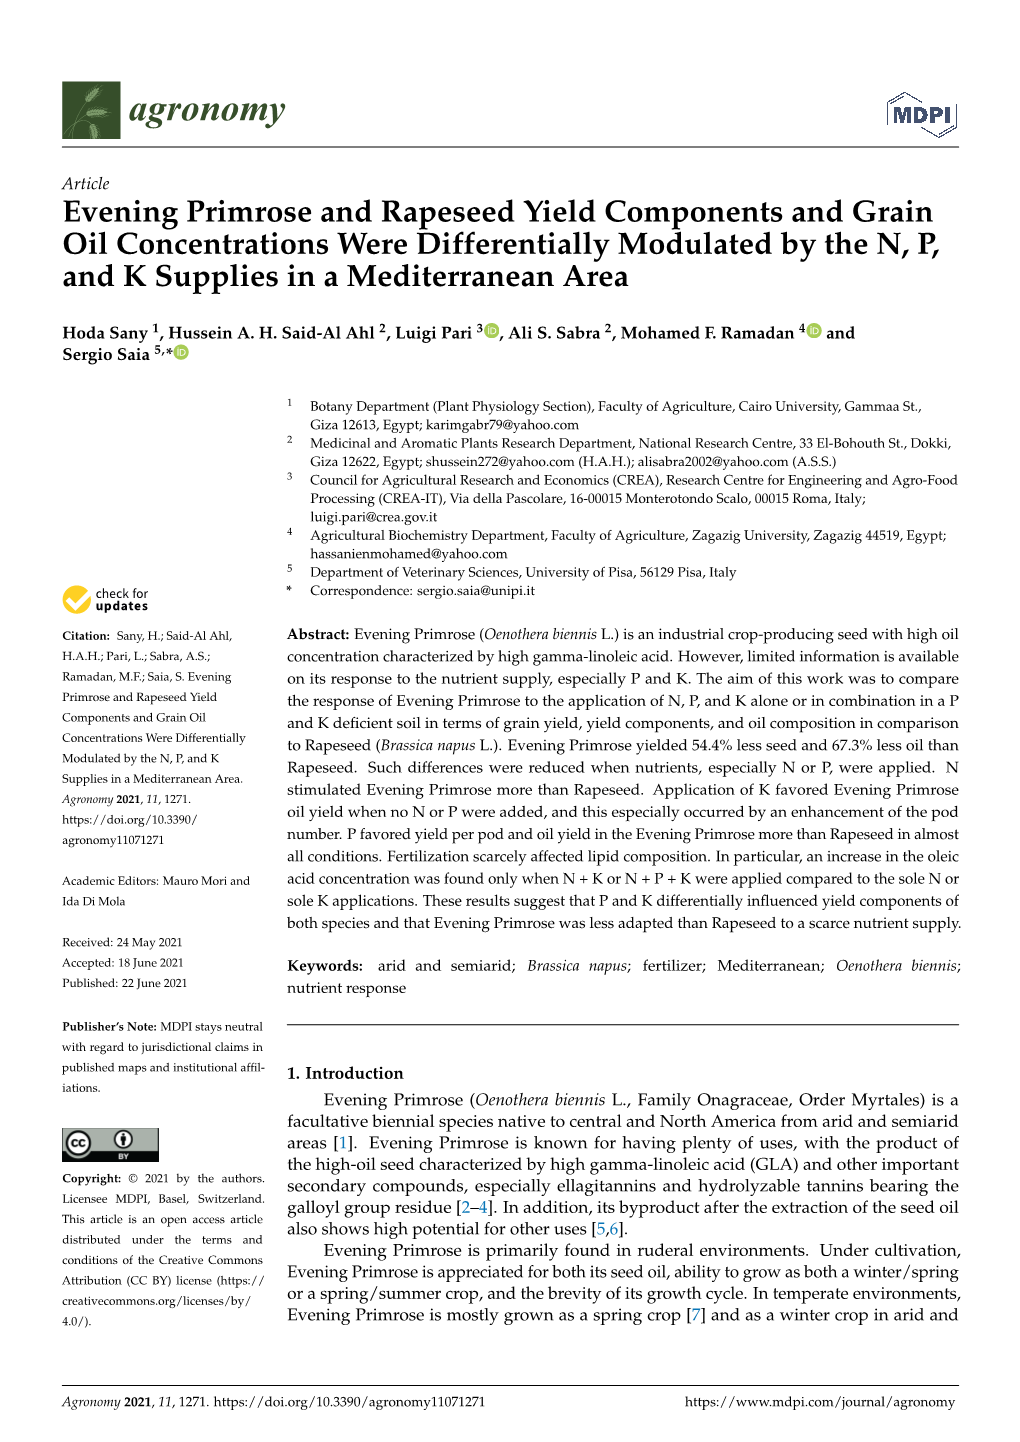 Evening Primrose and Rapeseed Yield Components and Grain Oil Concentrations Were Differentially Modulated by the N, P, and K Supplies in a Mediterranean Area